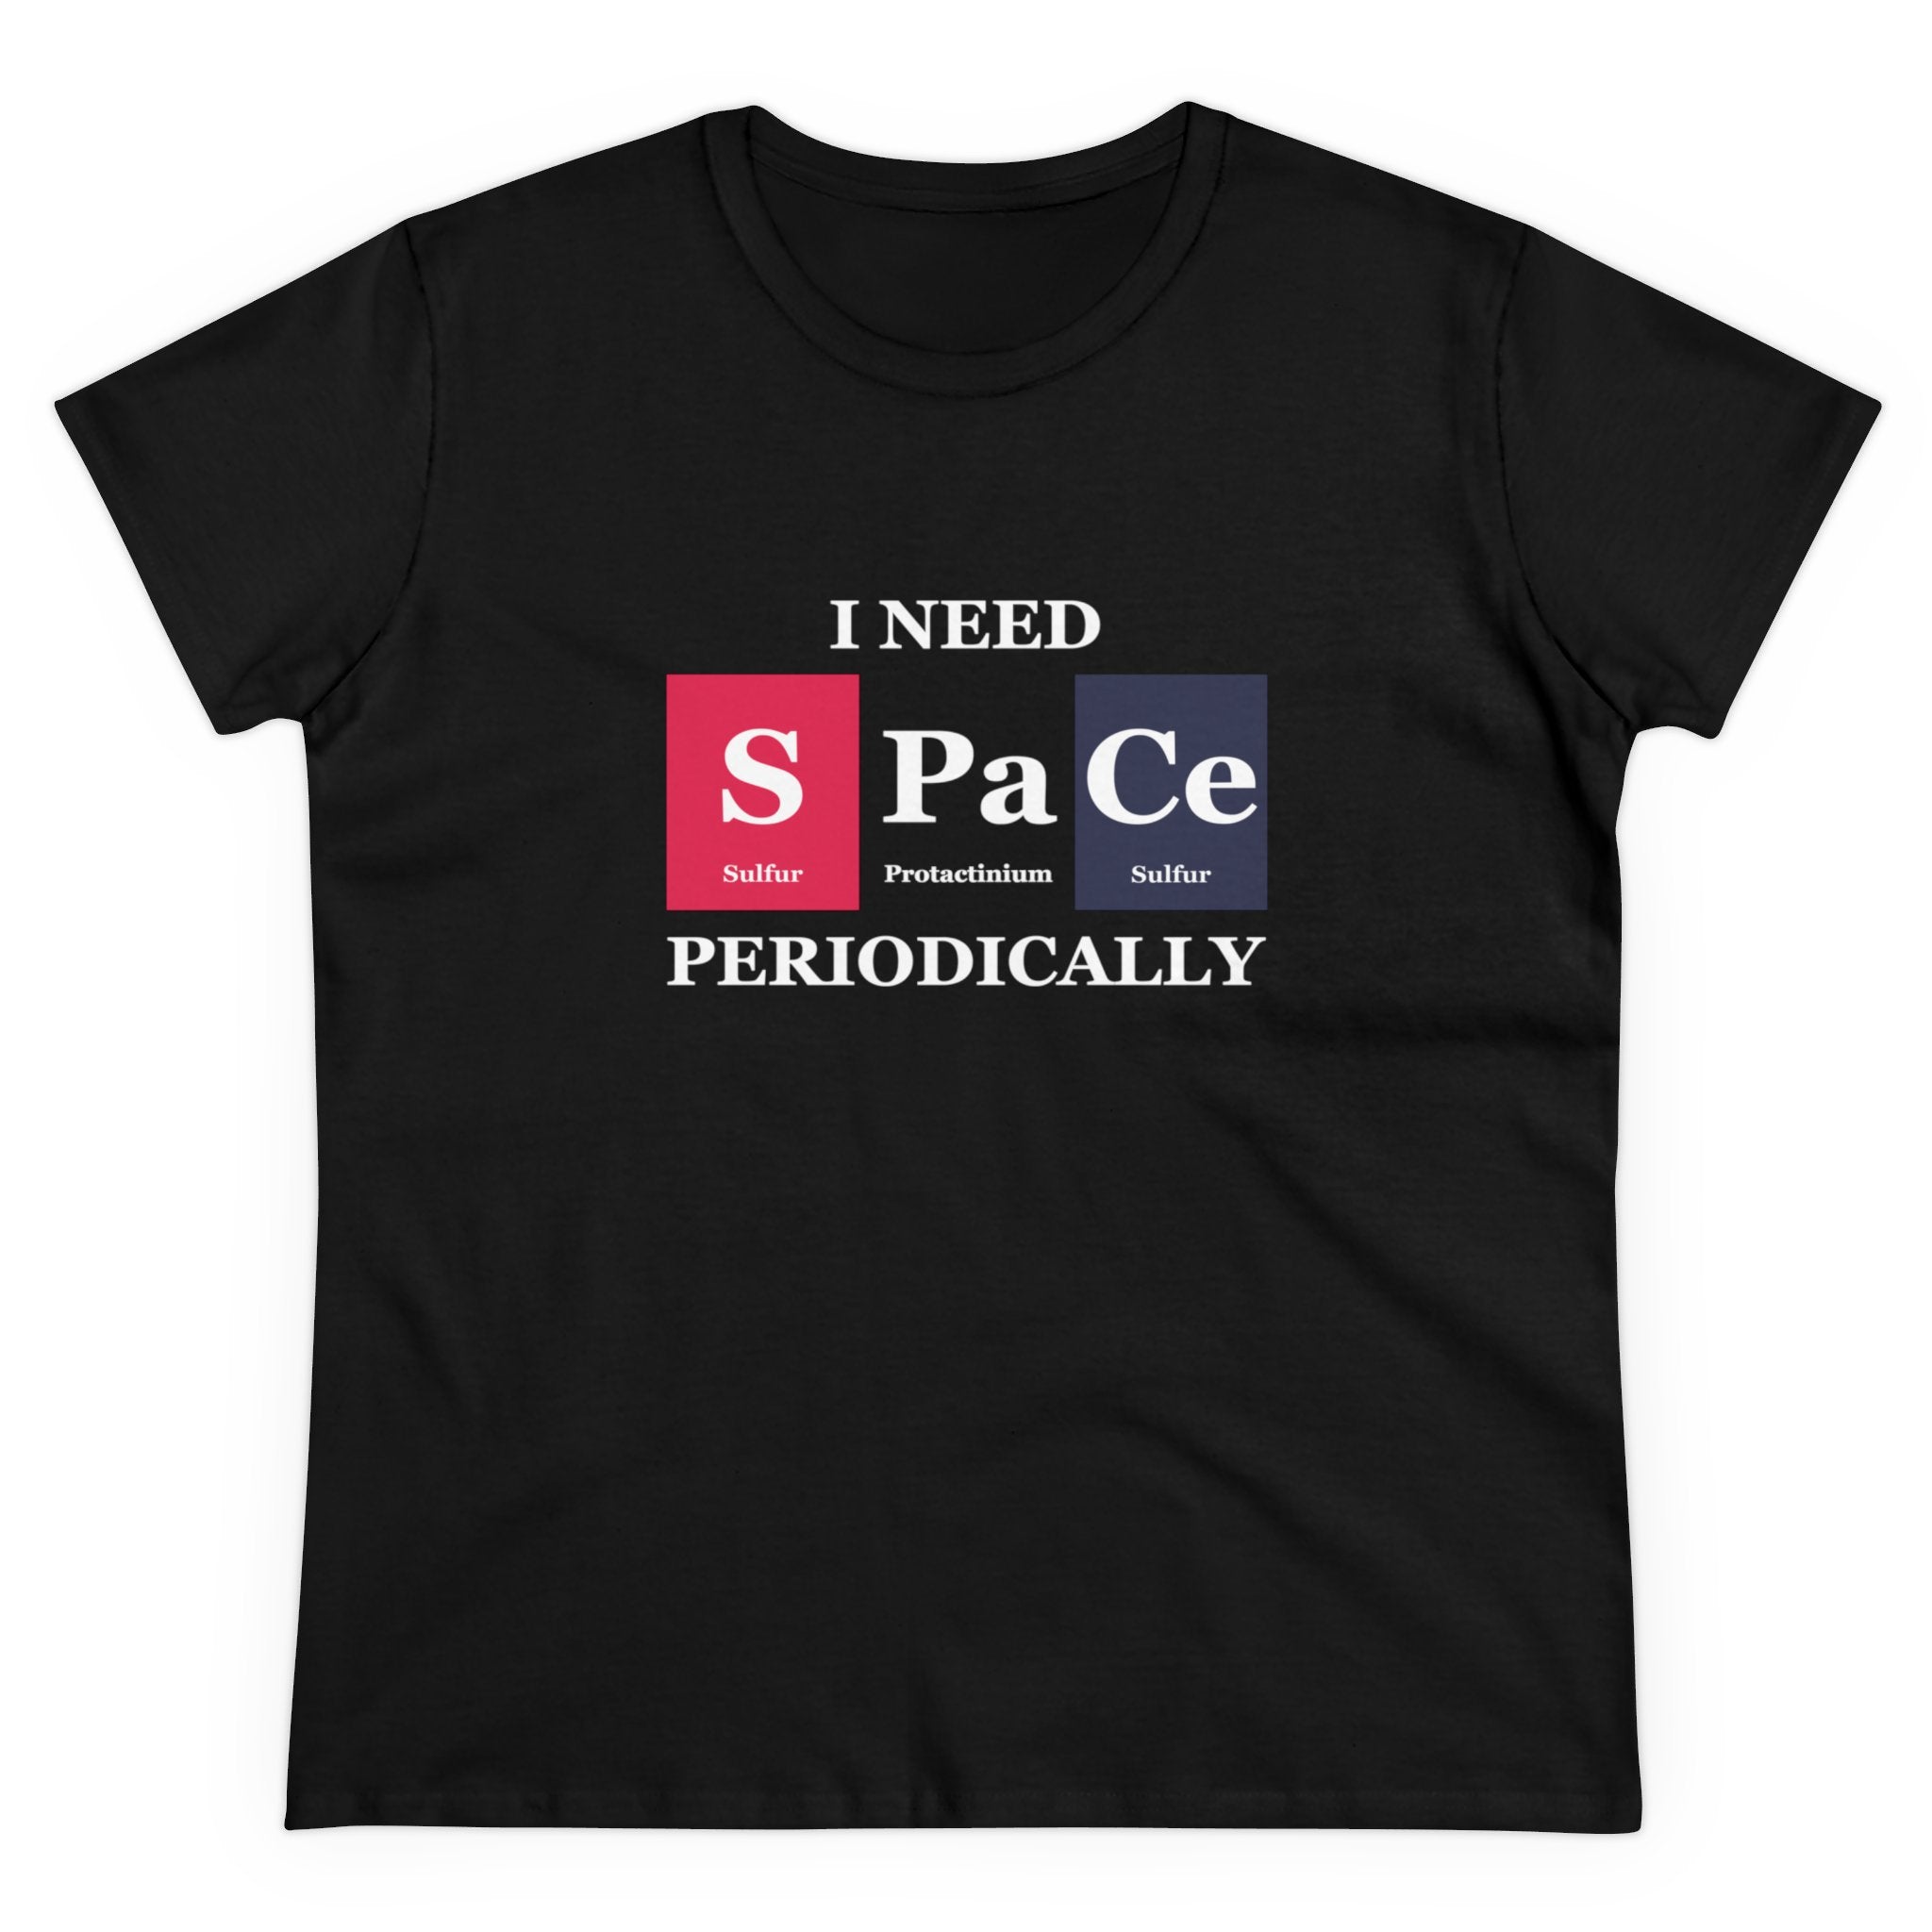 A black S-Pa-Ce - Women's Tee that combines comfort with style, featuring the text "I NEED SPACE PERIODICALLY" cleverly designed with "S", "Pa", and "Ce" styled to resemble elements from the periodic table (Sulfur, Protactinium, and Cerium).